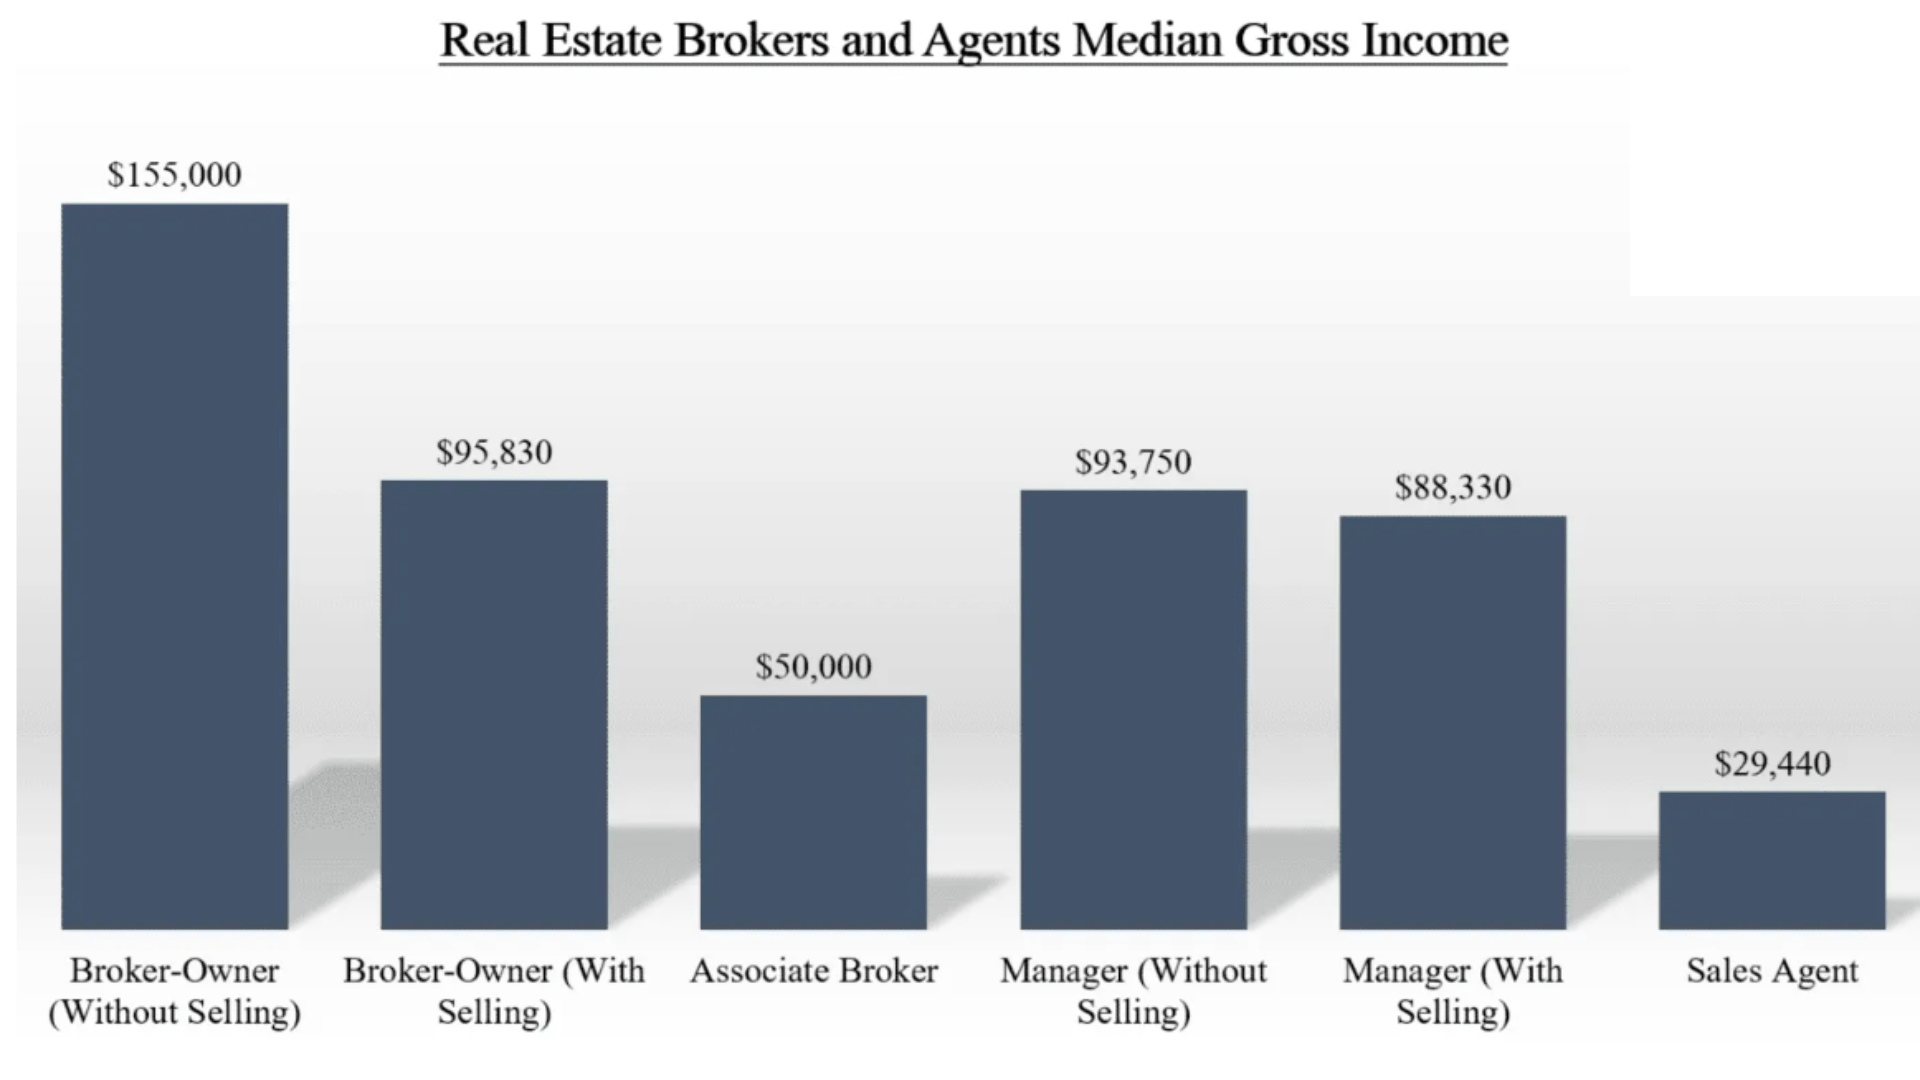 Do brokers make more money than real estate agents?